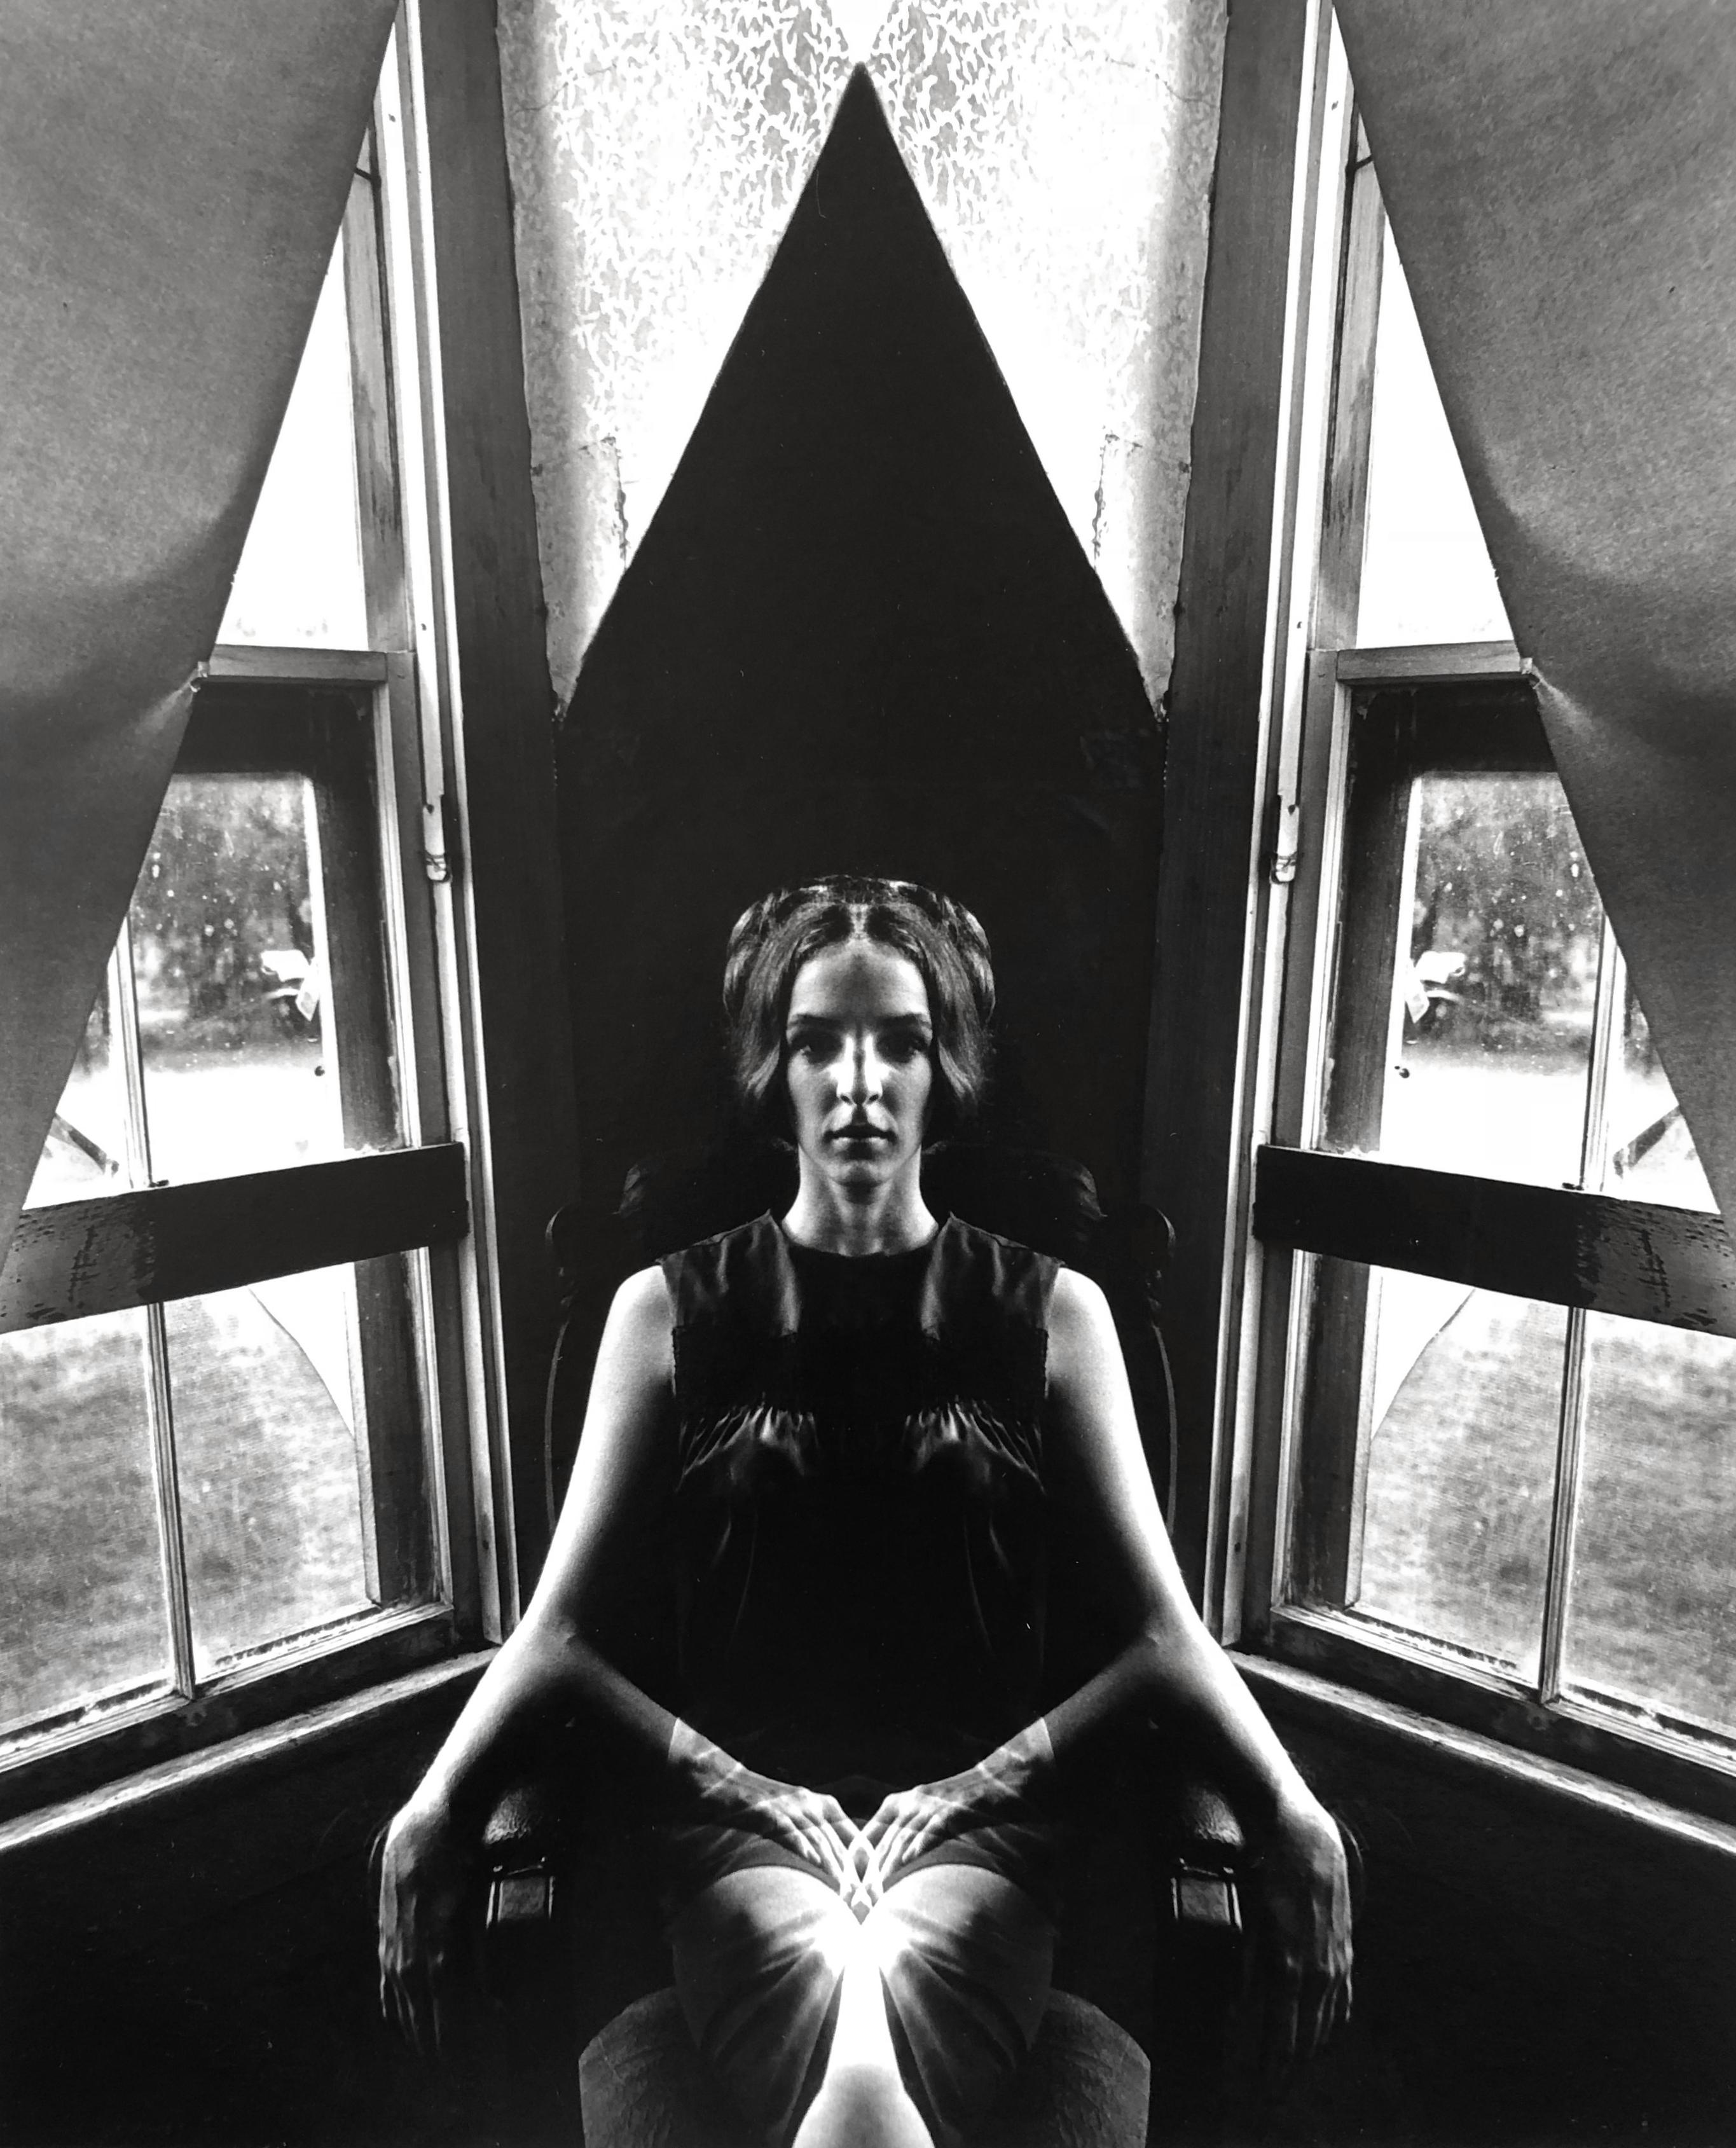 Jerry Uelsmann, The Quest of Continual Becoming, 1965, vintage silver gelatin print, Image Size: Image size: 12.75 x 9.5", Drymounted 16 x 20", matted 22 x 28". Signed, titled, and dated on mount recto. [surreal woman reflection]